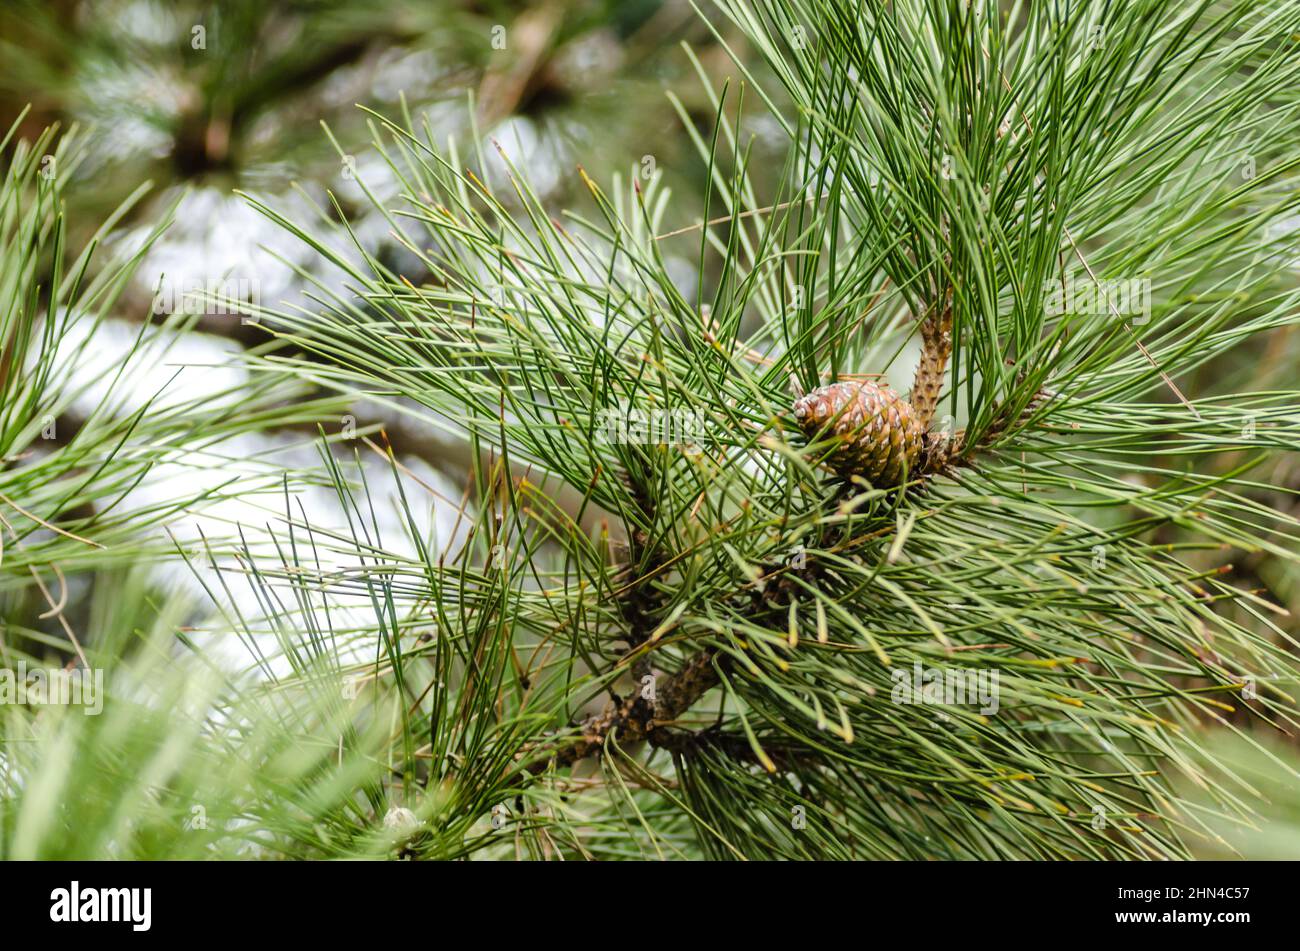 A young pine tree branch with cones in spring. Stock Photo